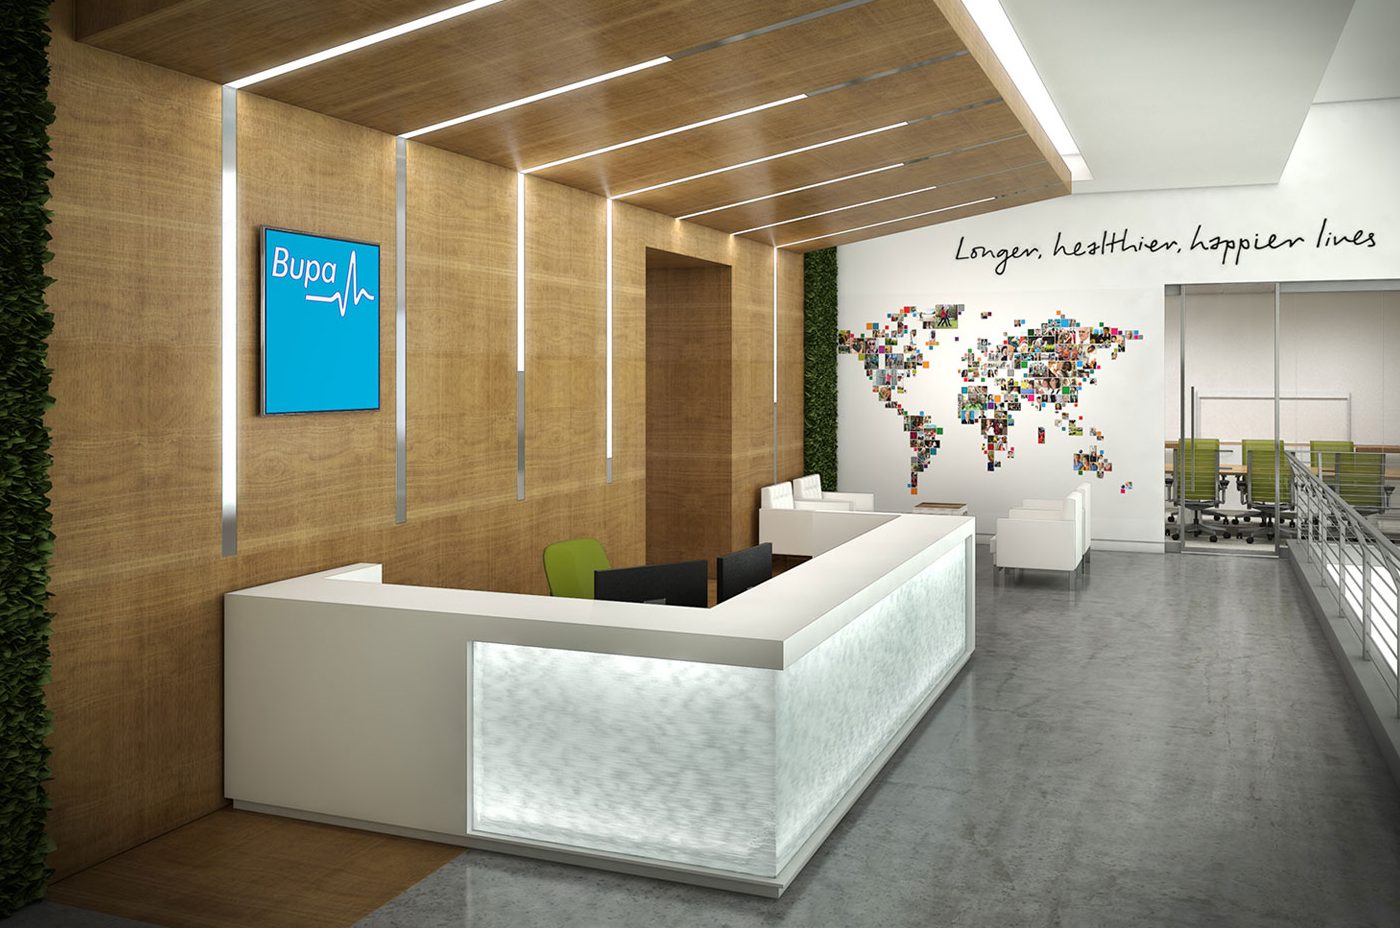 photo of the bupa office reception area